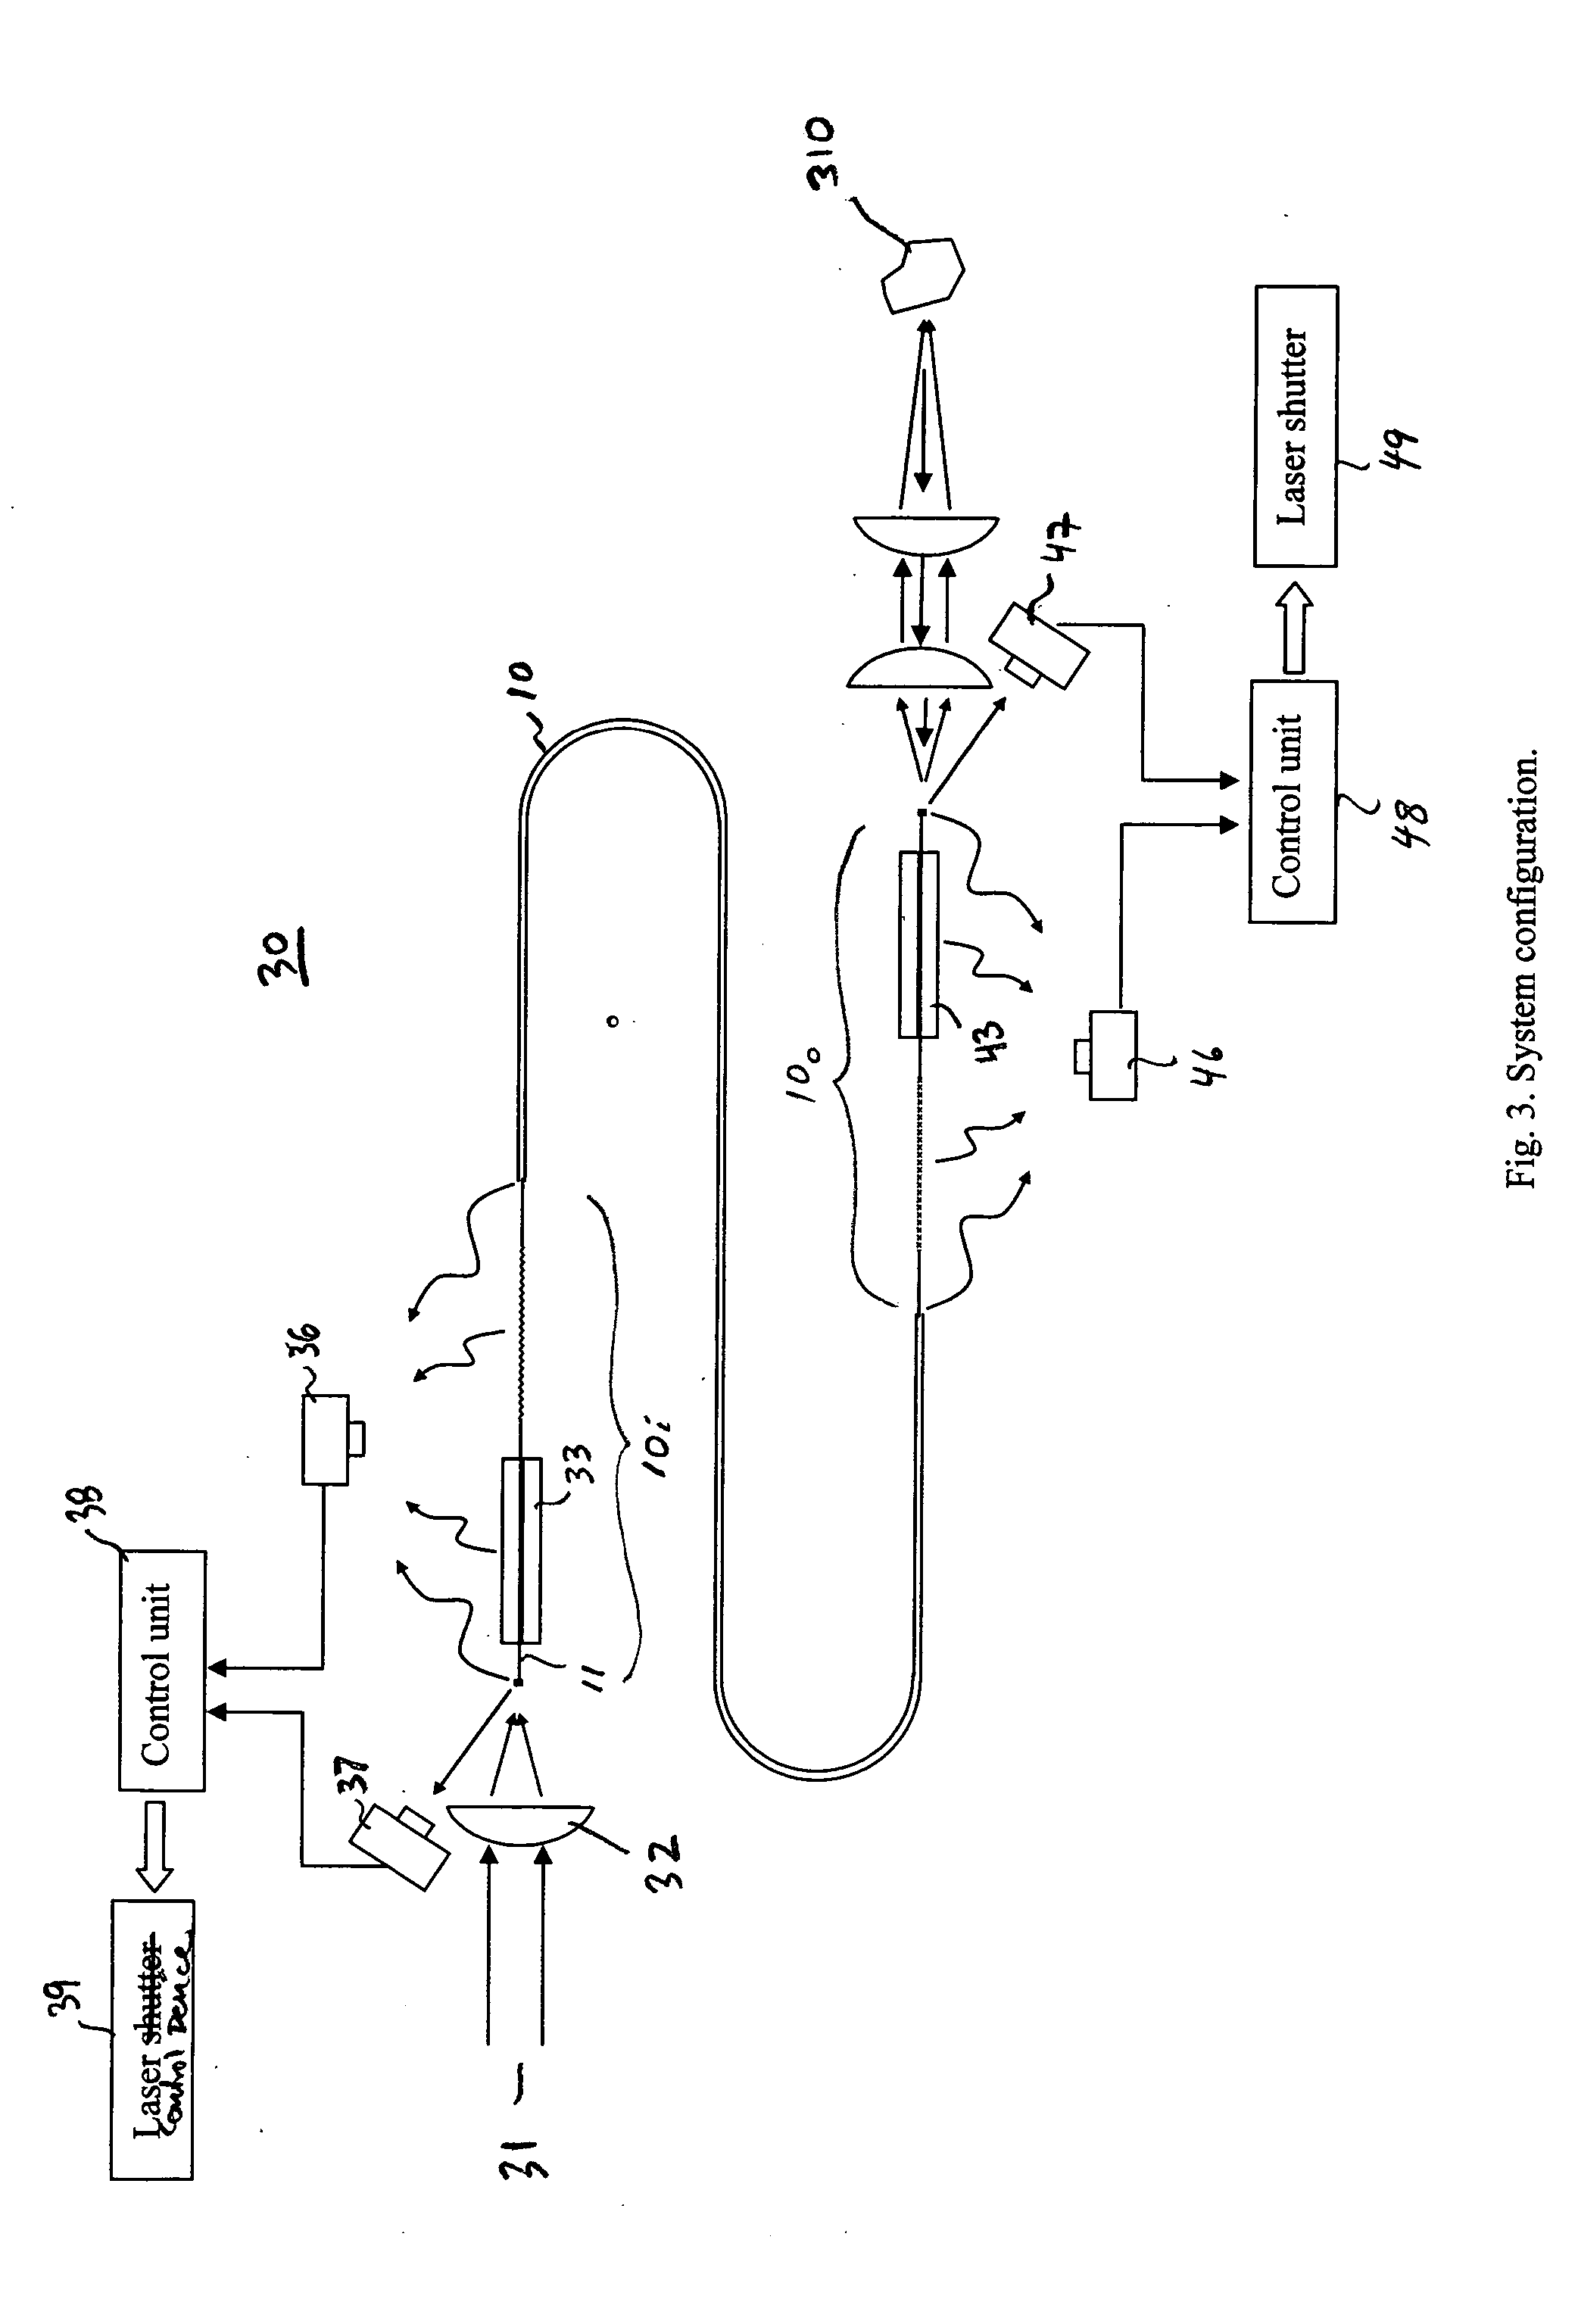 Fiber delivery system with enhanced passive fiber protection and active monitoring